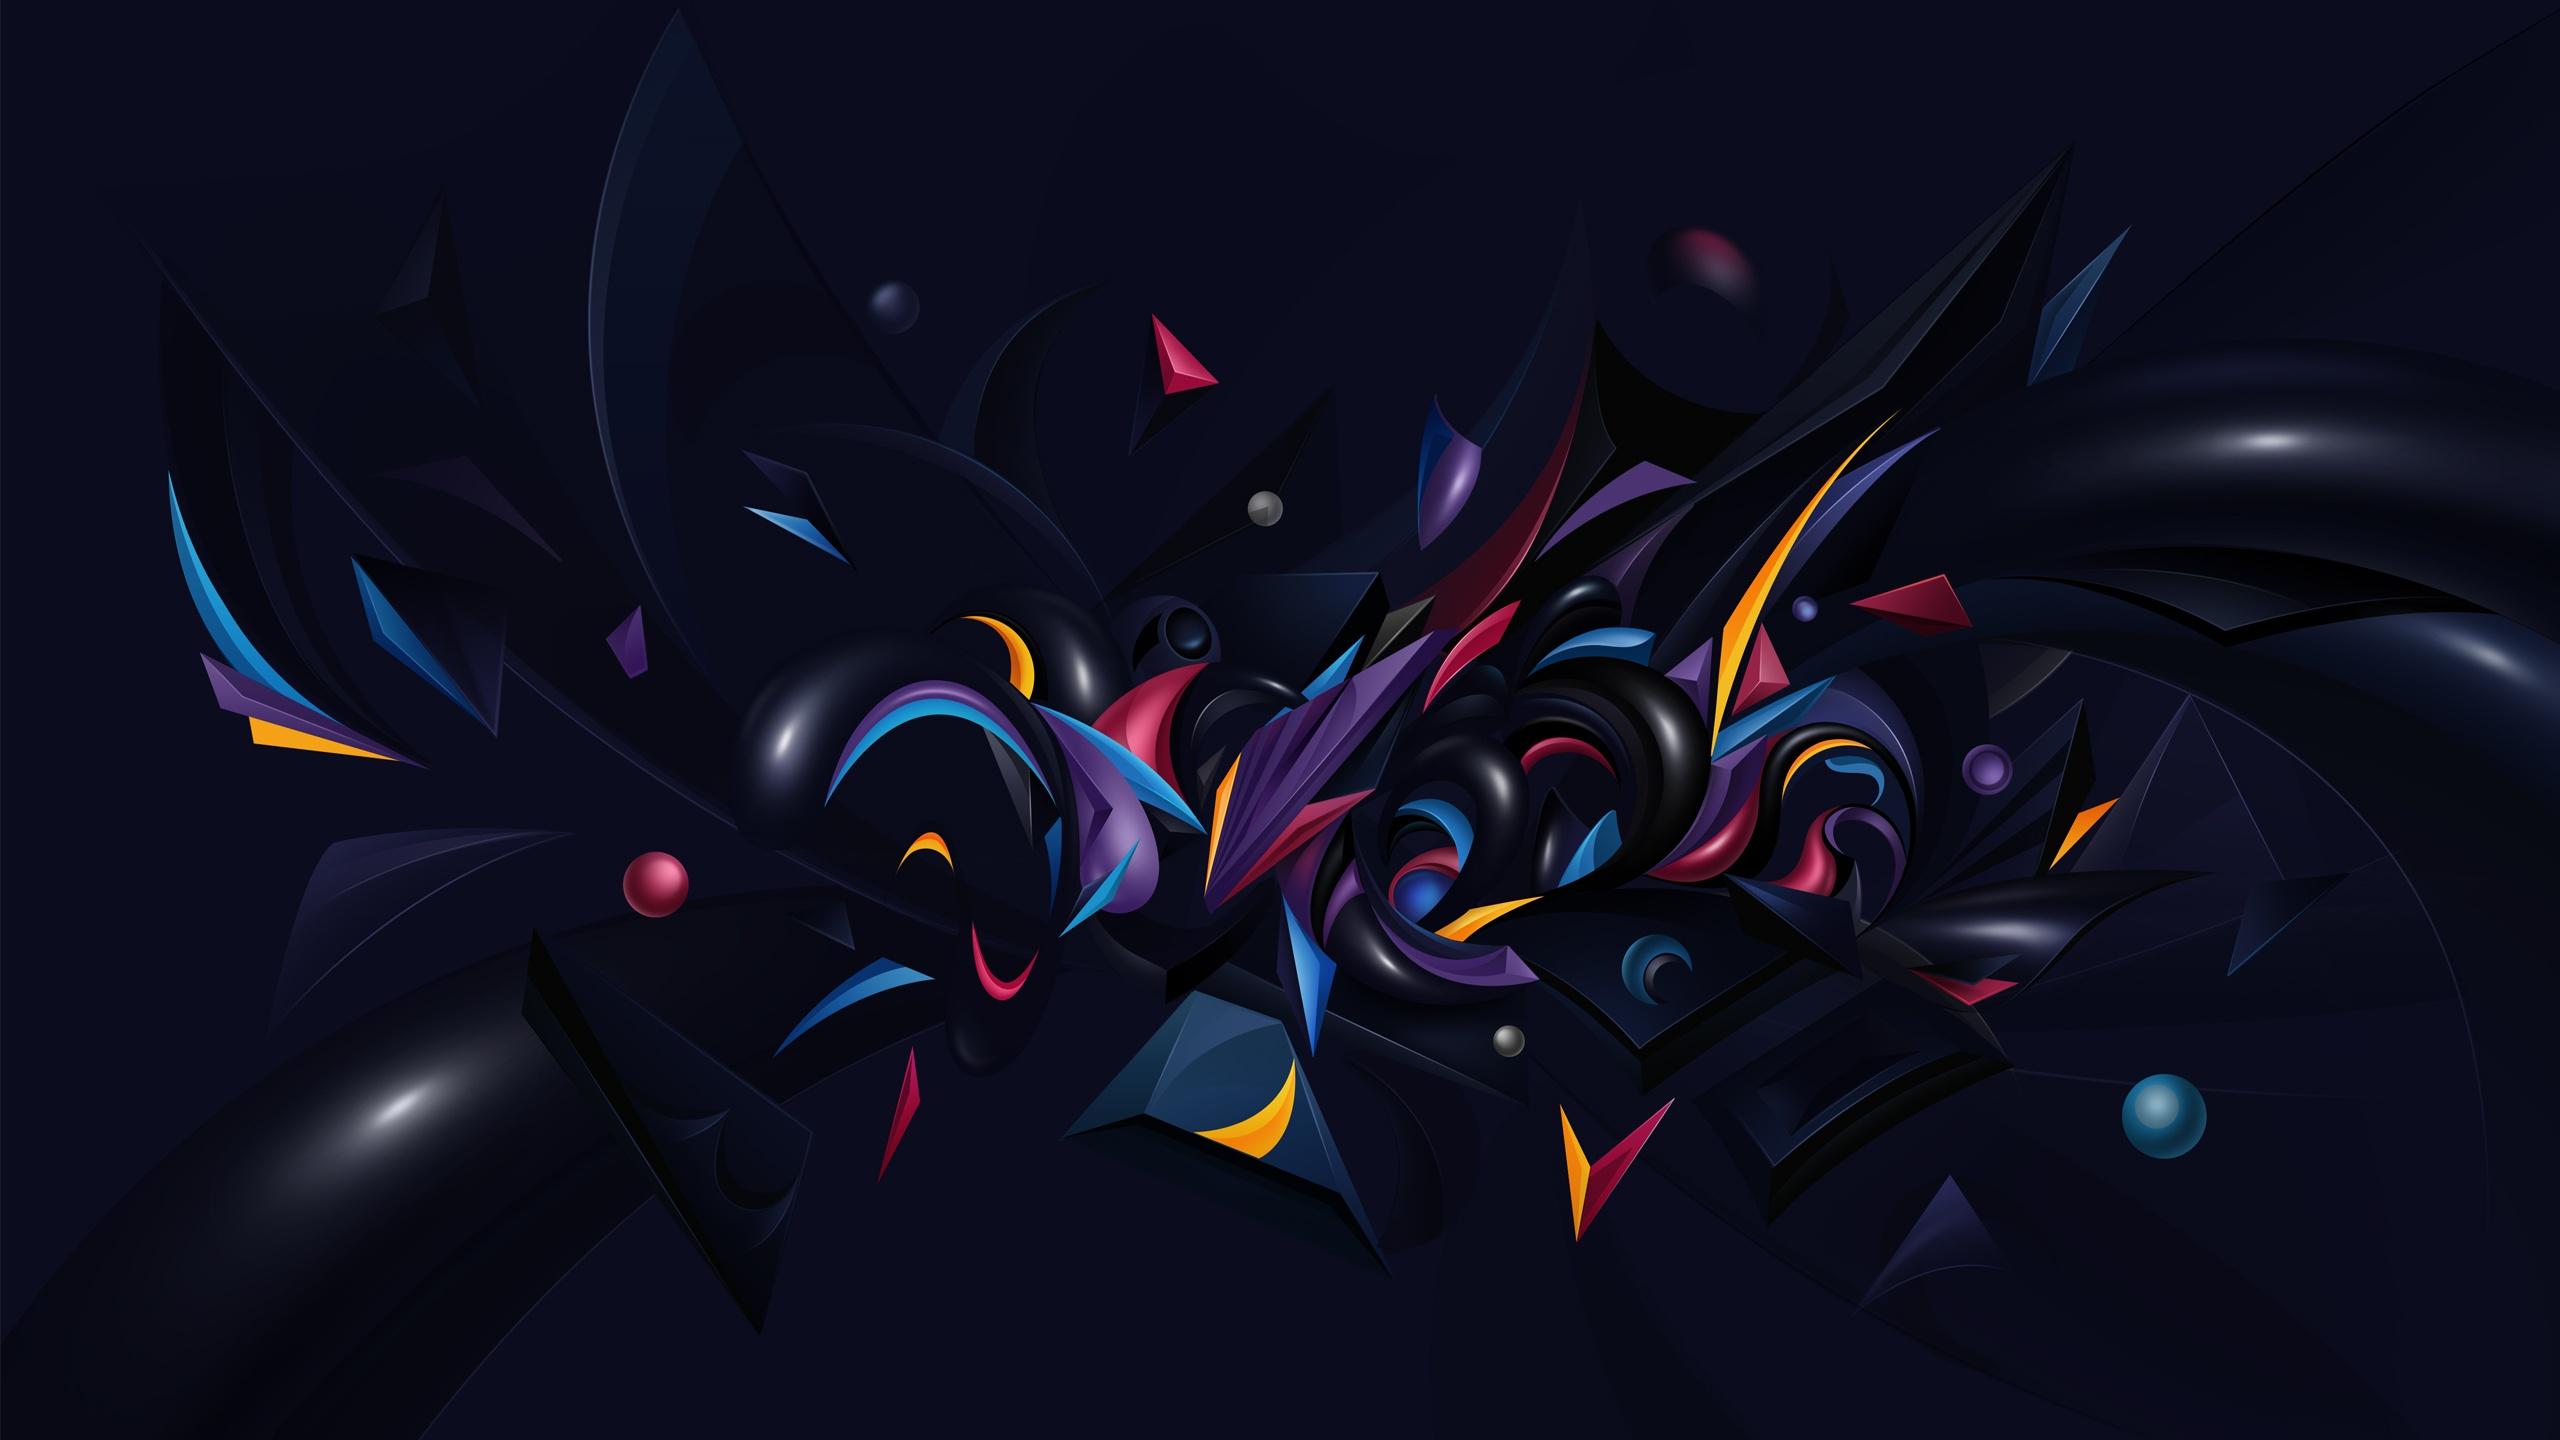 Abstract Chaos Wallpaper in jpg format for free download